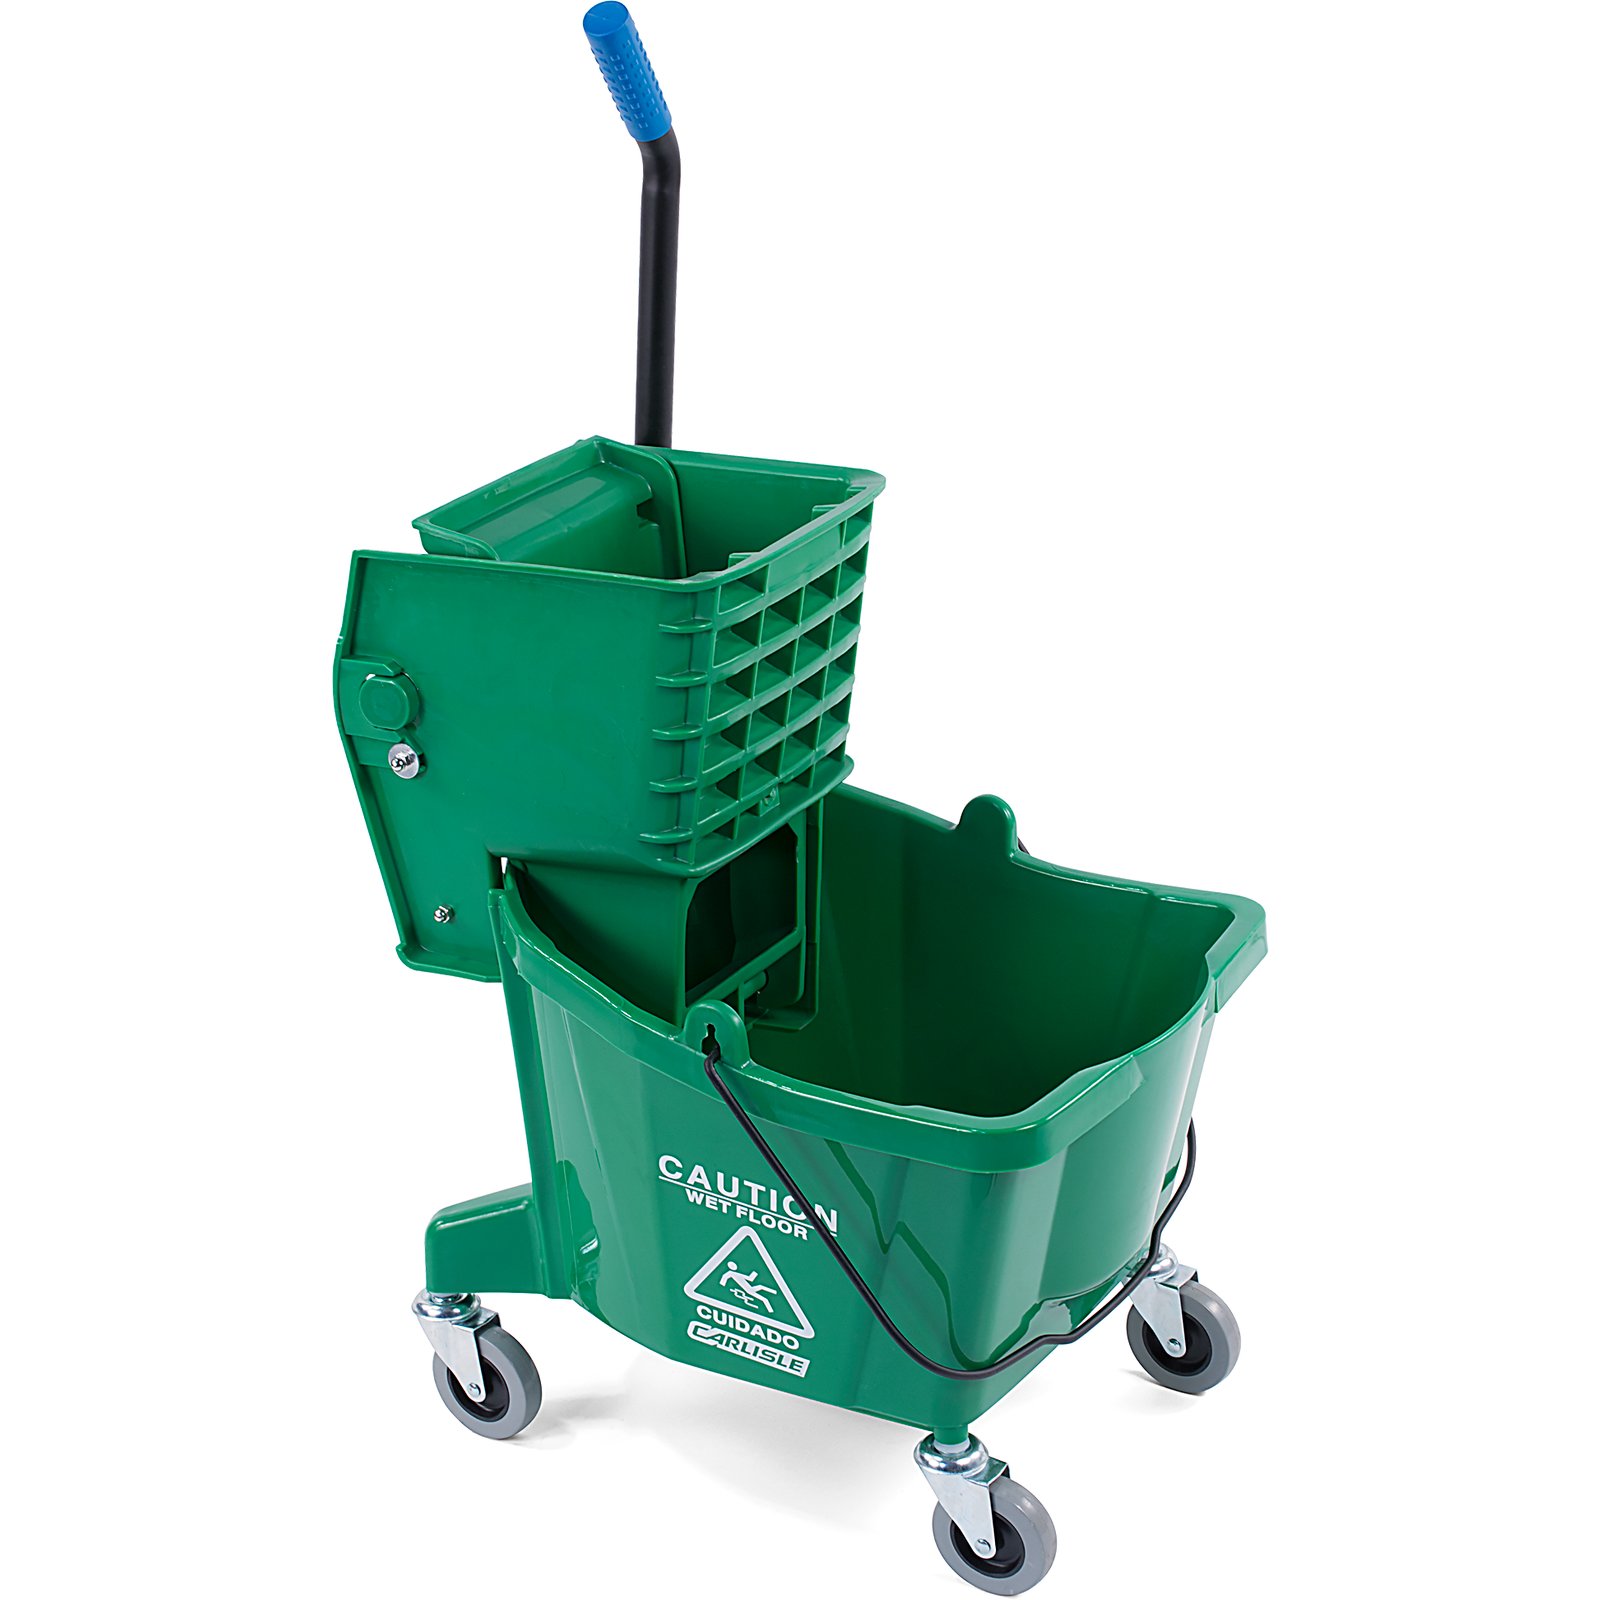 Berkshire Cleanroom Mop Cart with Buckets; Stainless Steel, Fully  Autoclavable, Two 20 Liter Mop Buckets, Locking Casters, BRK-BCRMOPCART1